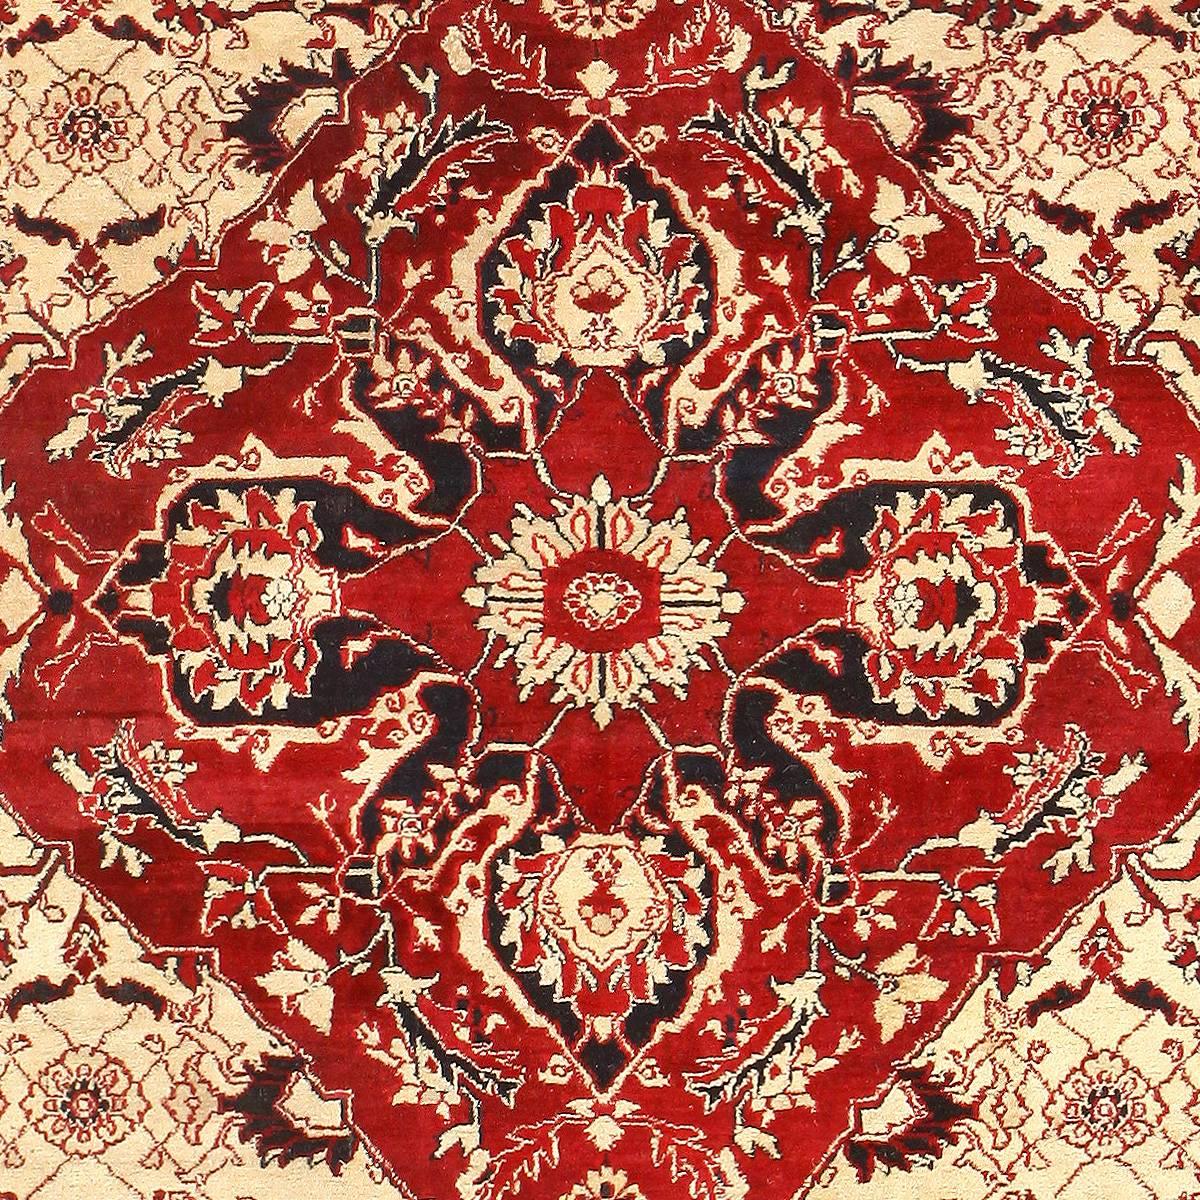 Fine Antique Indian Agra Rug, Country of Origin / Type of Rug: Indian Rugs, Circa Date: 1900. Size: 6 ft x 8 ft 9 in (1.83 m x 2.67 m) 

Featuring a brilliant fiery color scheme that emphasizes the contrast of colors, this elegant Agra rug is